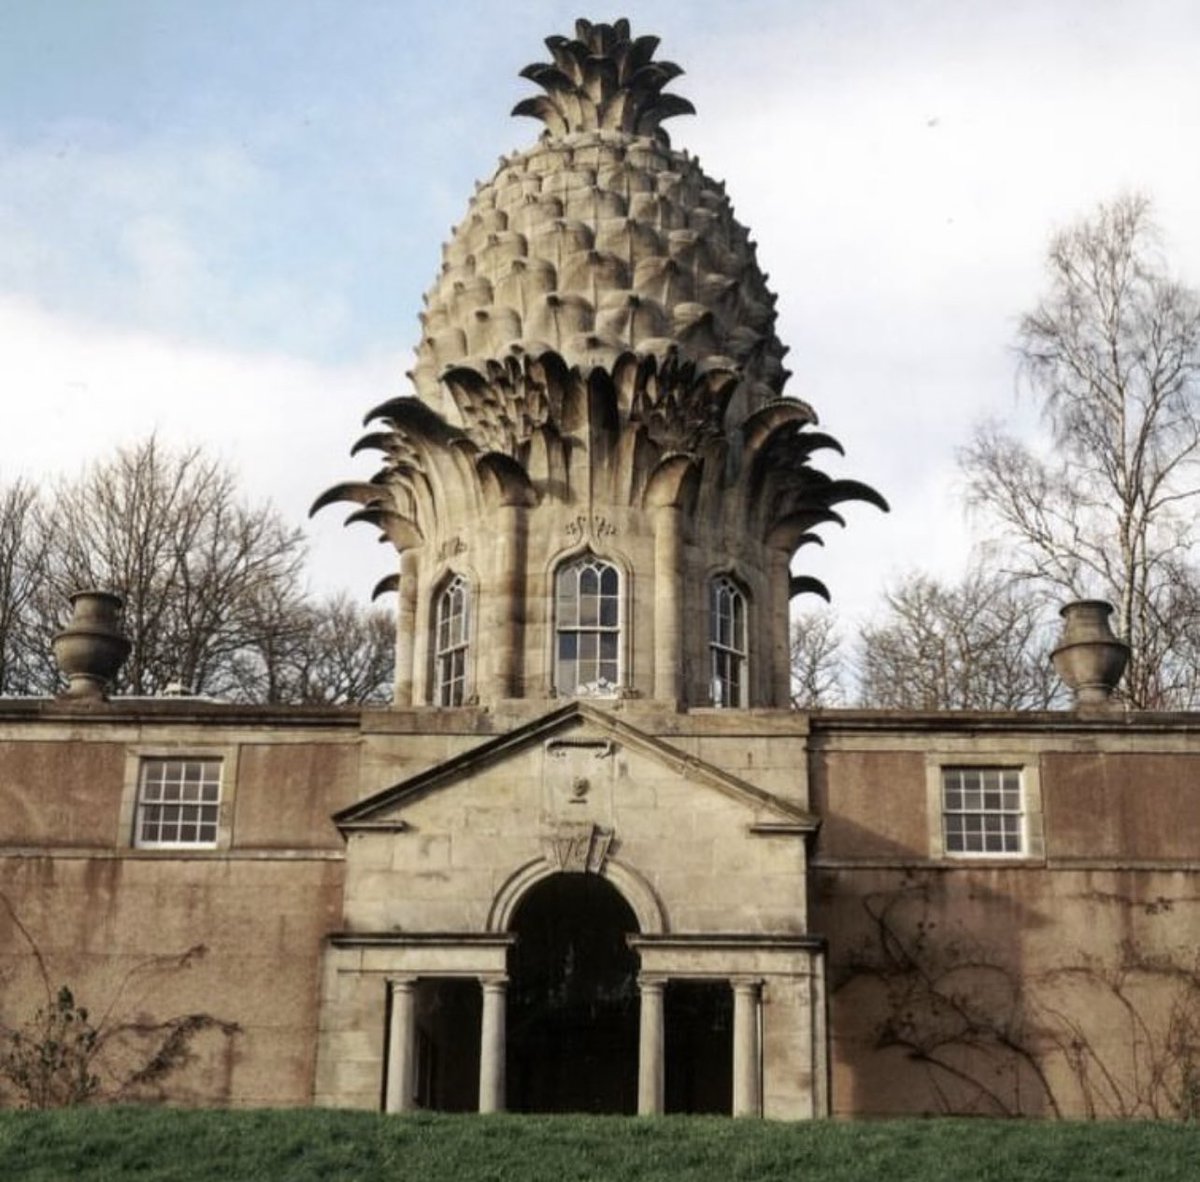 🍍 the Dunmore pineapple, Scotland built in 1761 in Scotland, is an iconic summerhouse with a unique pineapple-shaped dome. Commissioned by the 4th Earl of Dunmore, it symbolizes wealth and hospitality, as pineapples were rare and expensive in Europe at the time.